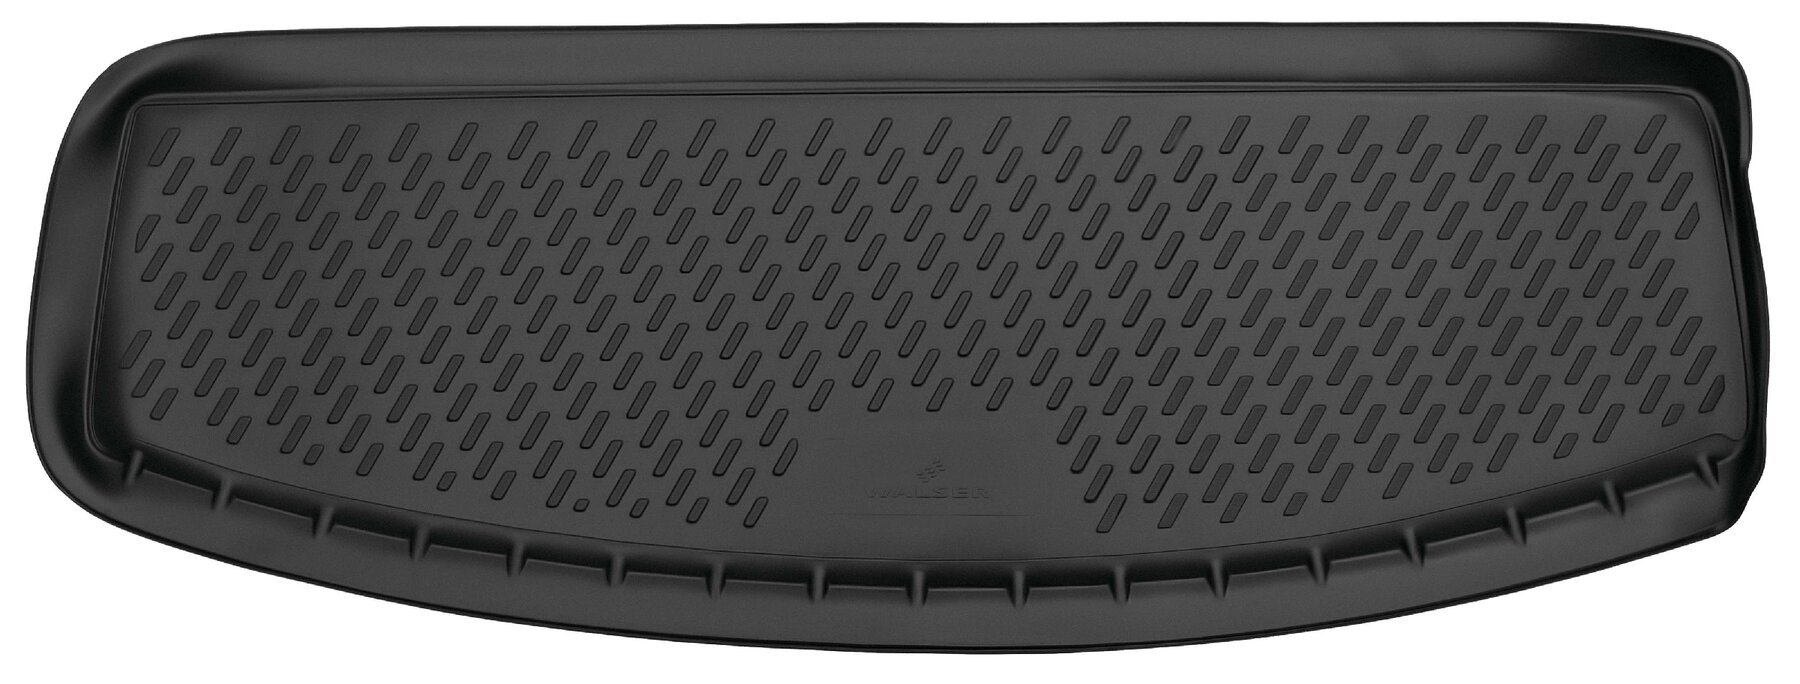 XTR Boot Liner for Mazda 5 (CW) 3rd row upright 2010-Today